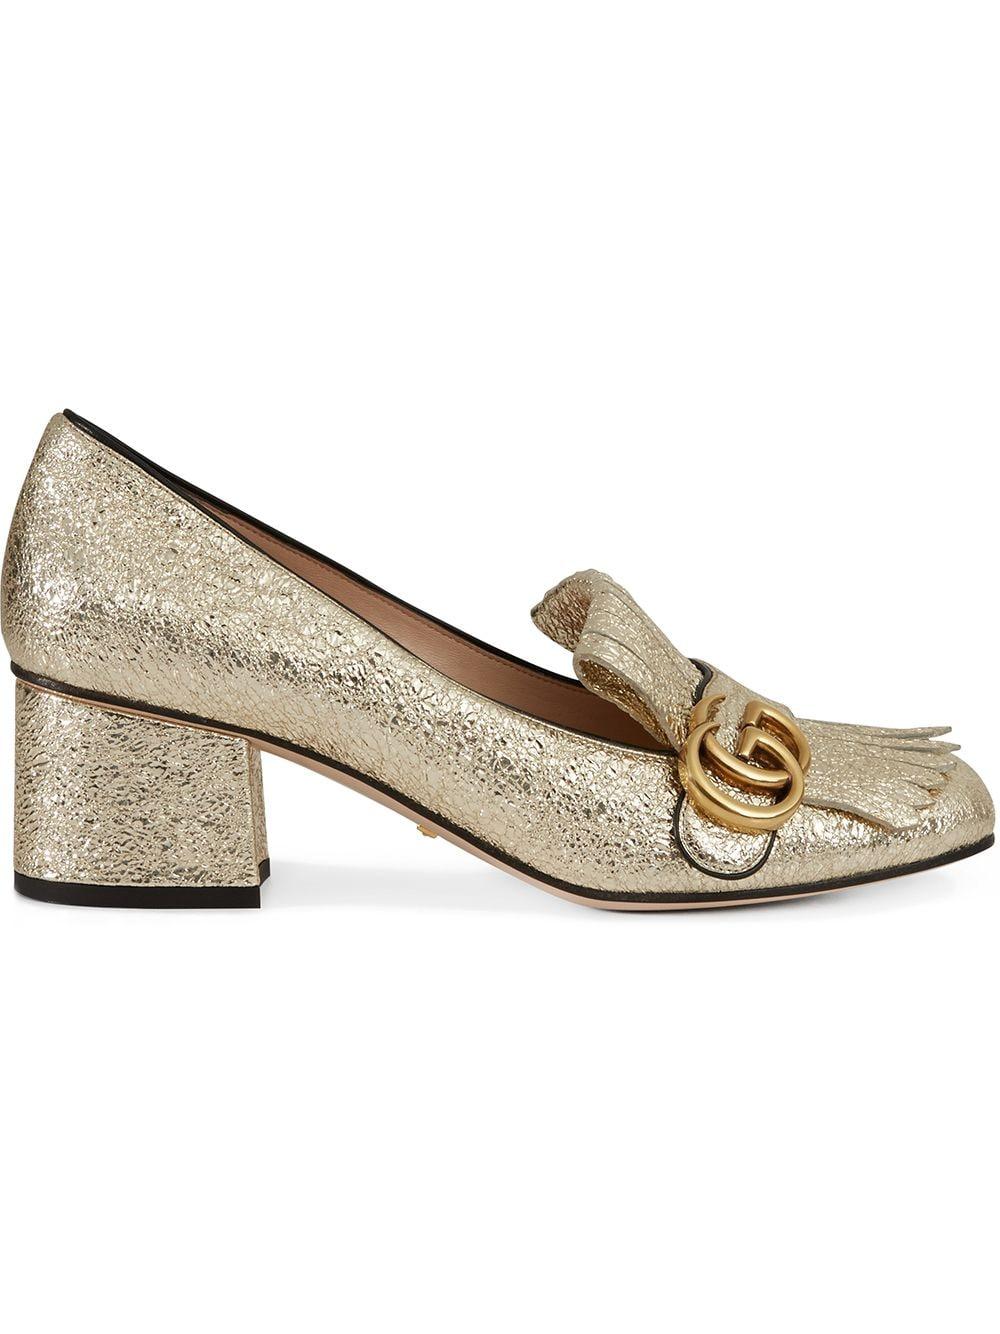 Gucci Leather Gold Marmont 55mm Pumps in Metallic | Lyst Australia